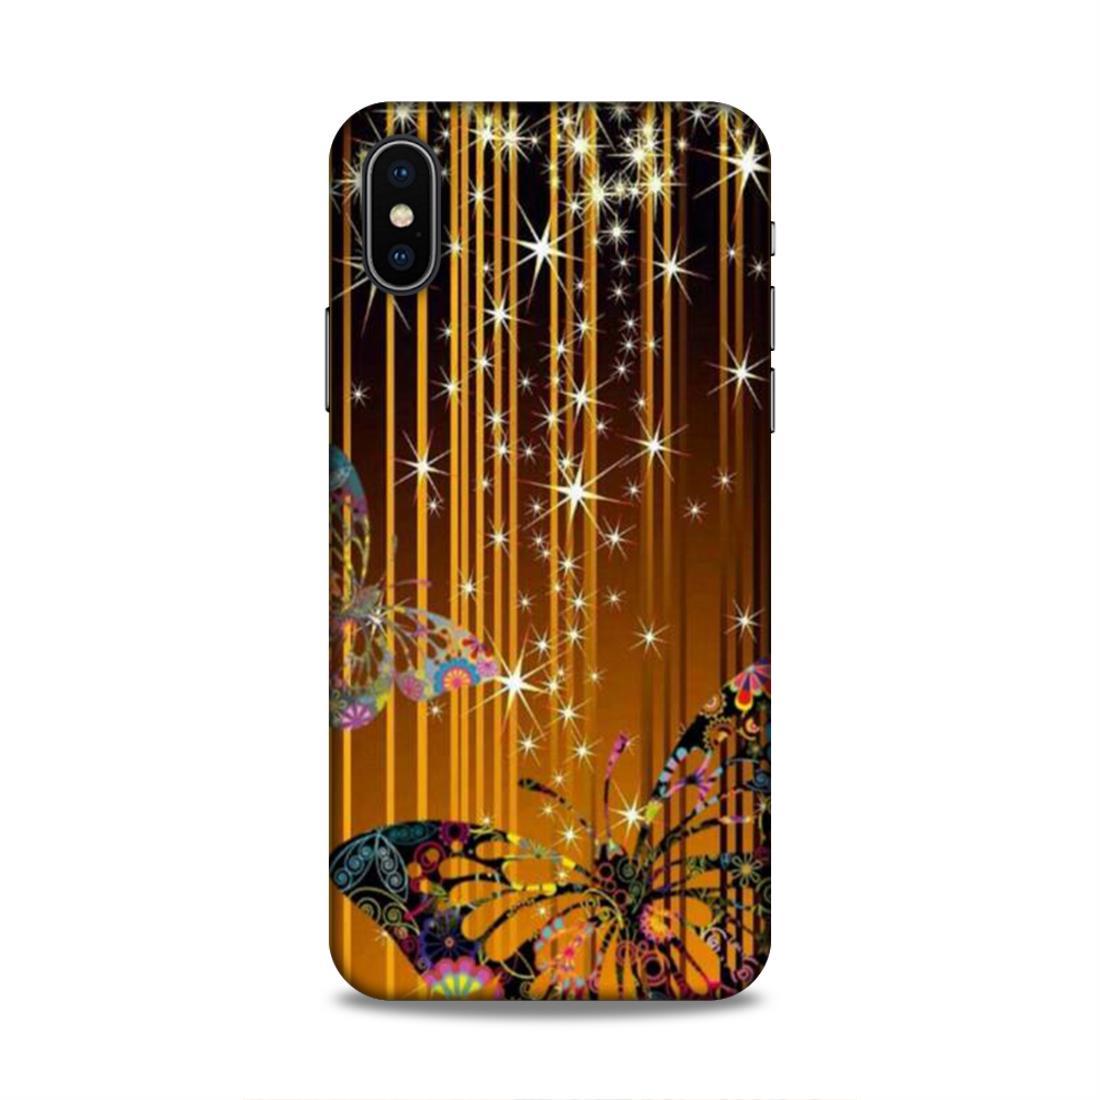 Fancy Star Butterfly iPhone XS Mobile Cover Case